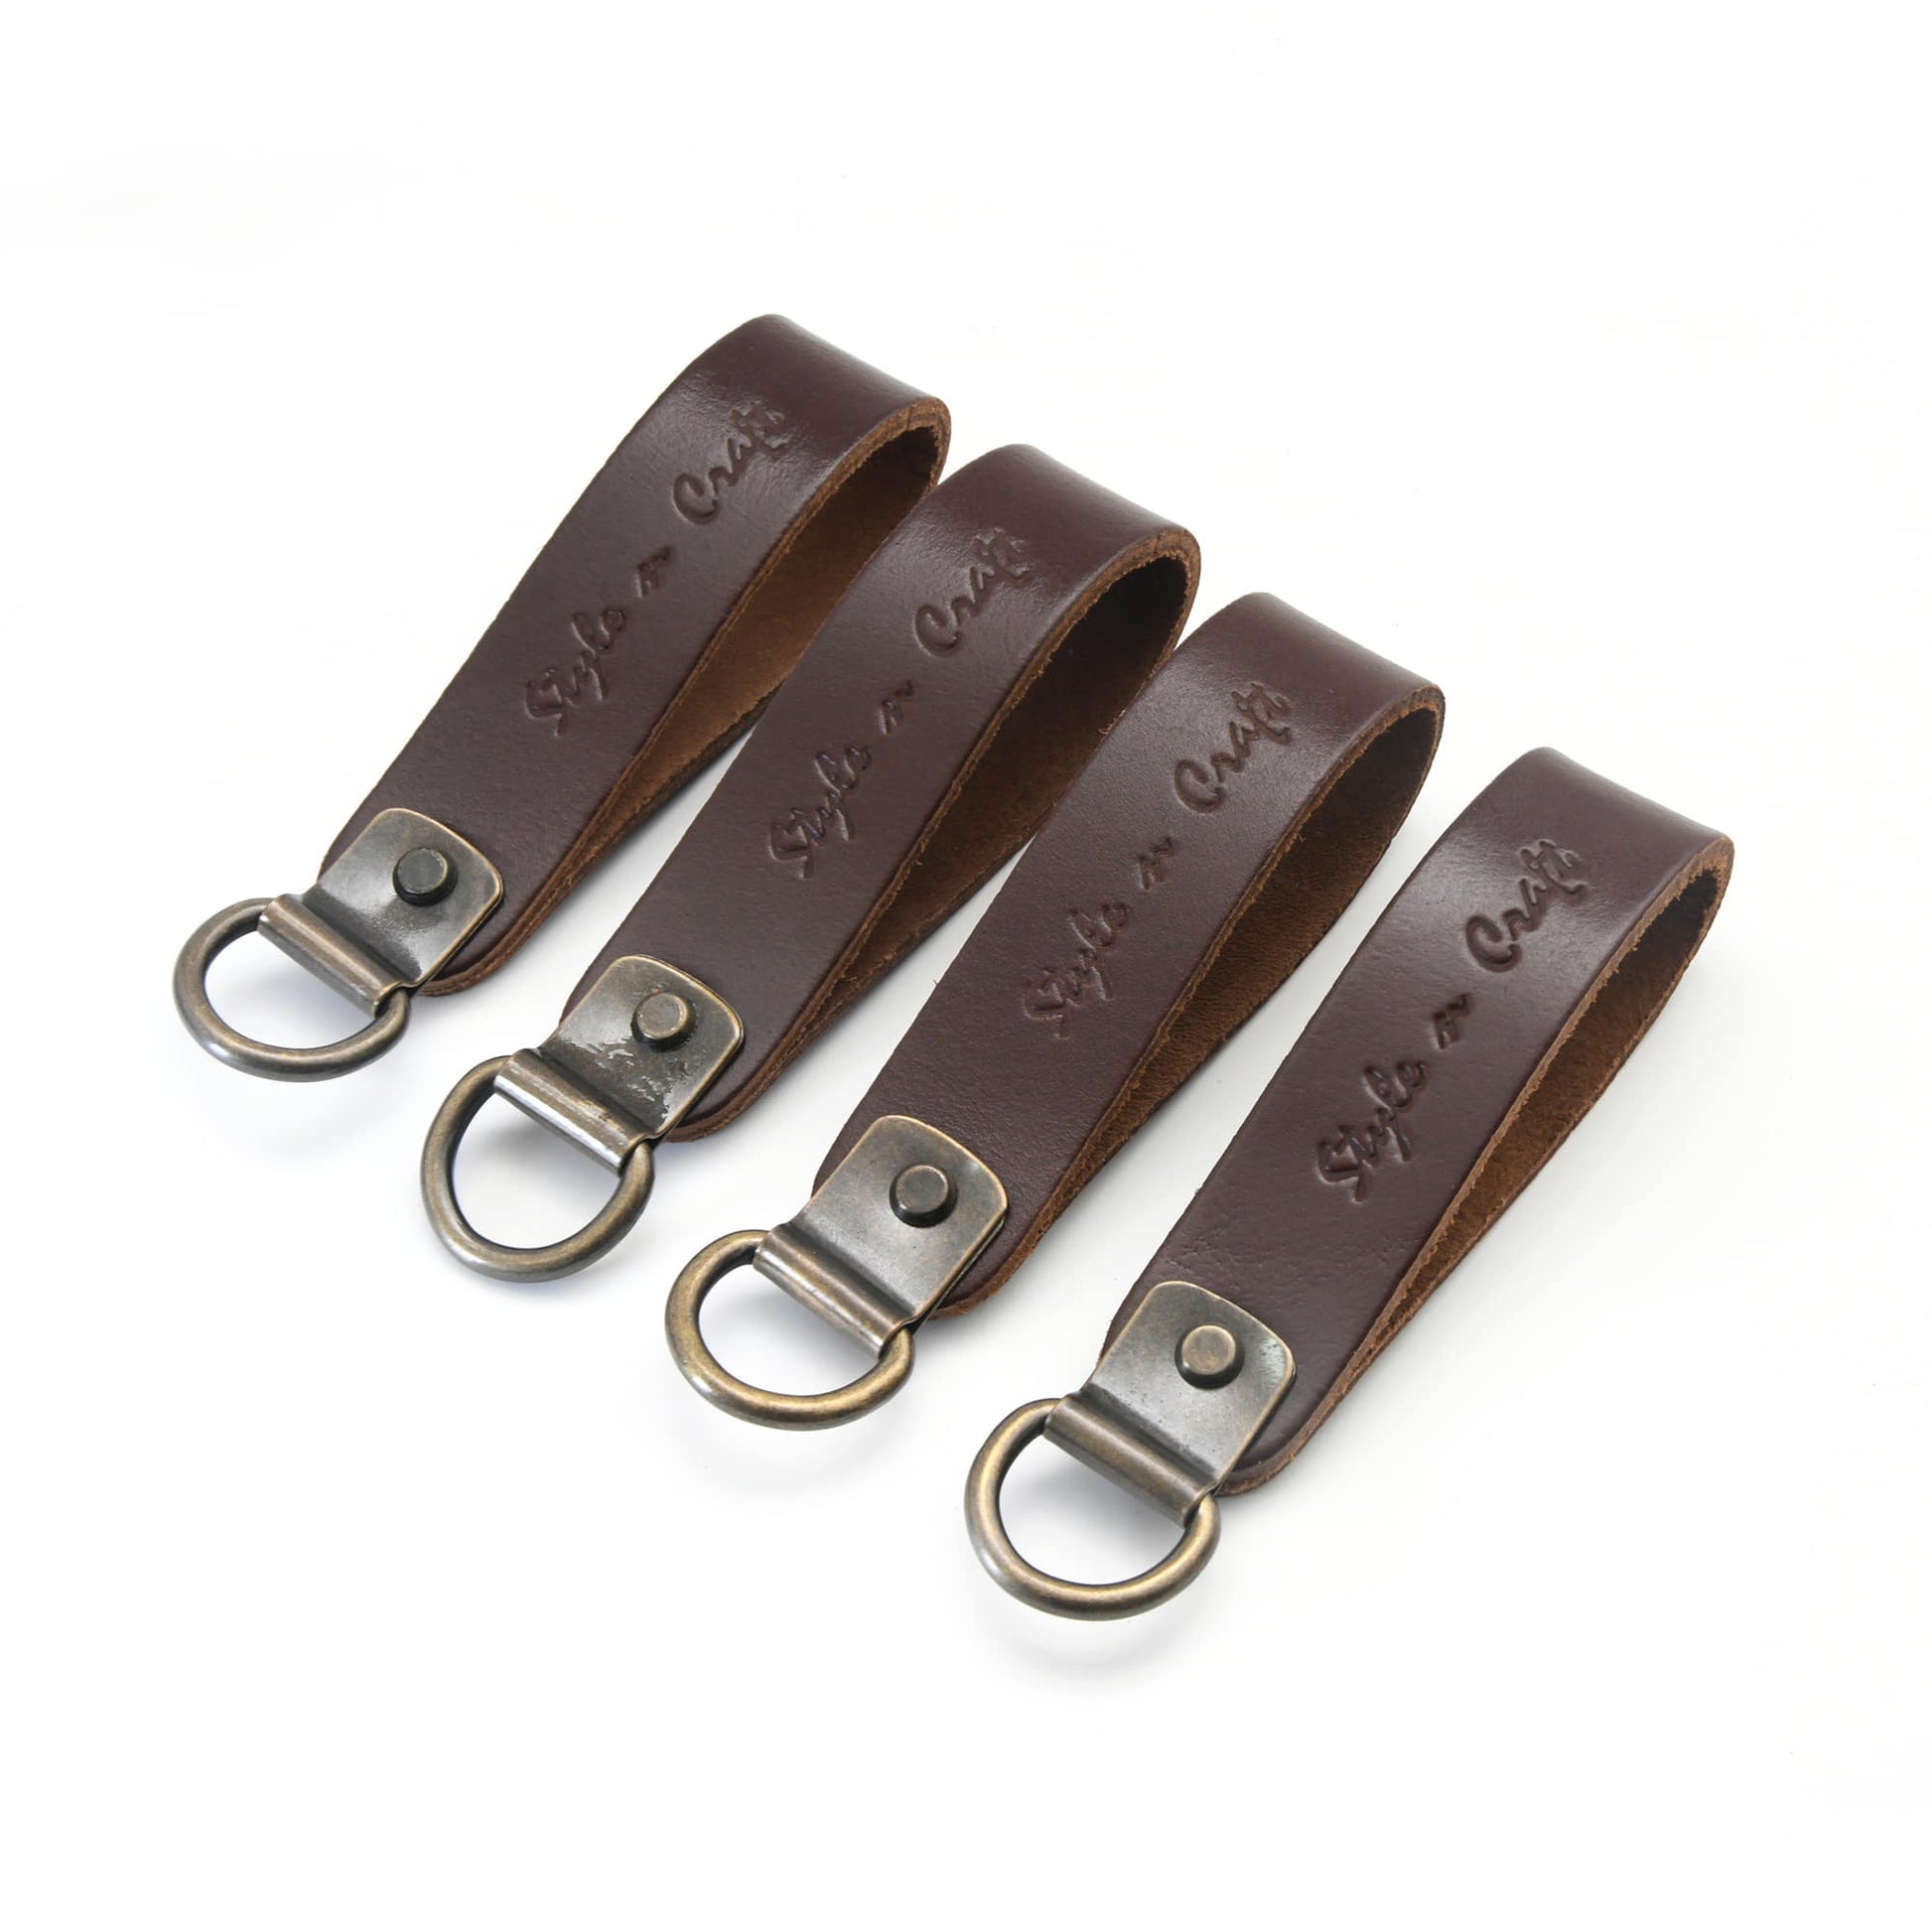 Suspender Attachment Set of D-Ring Leather Loops